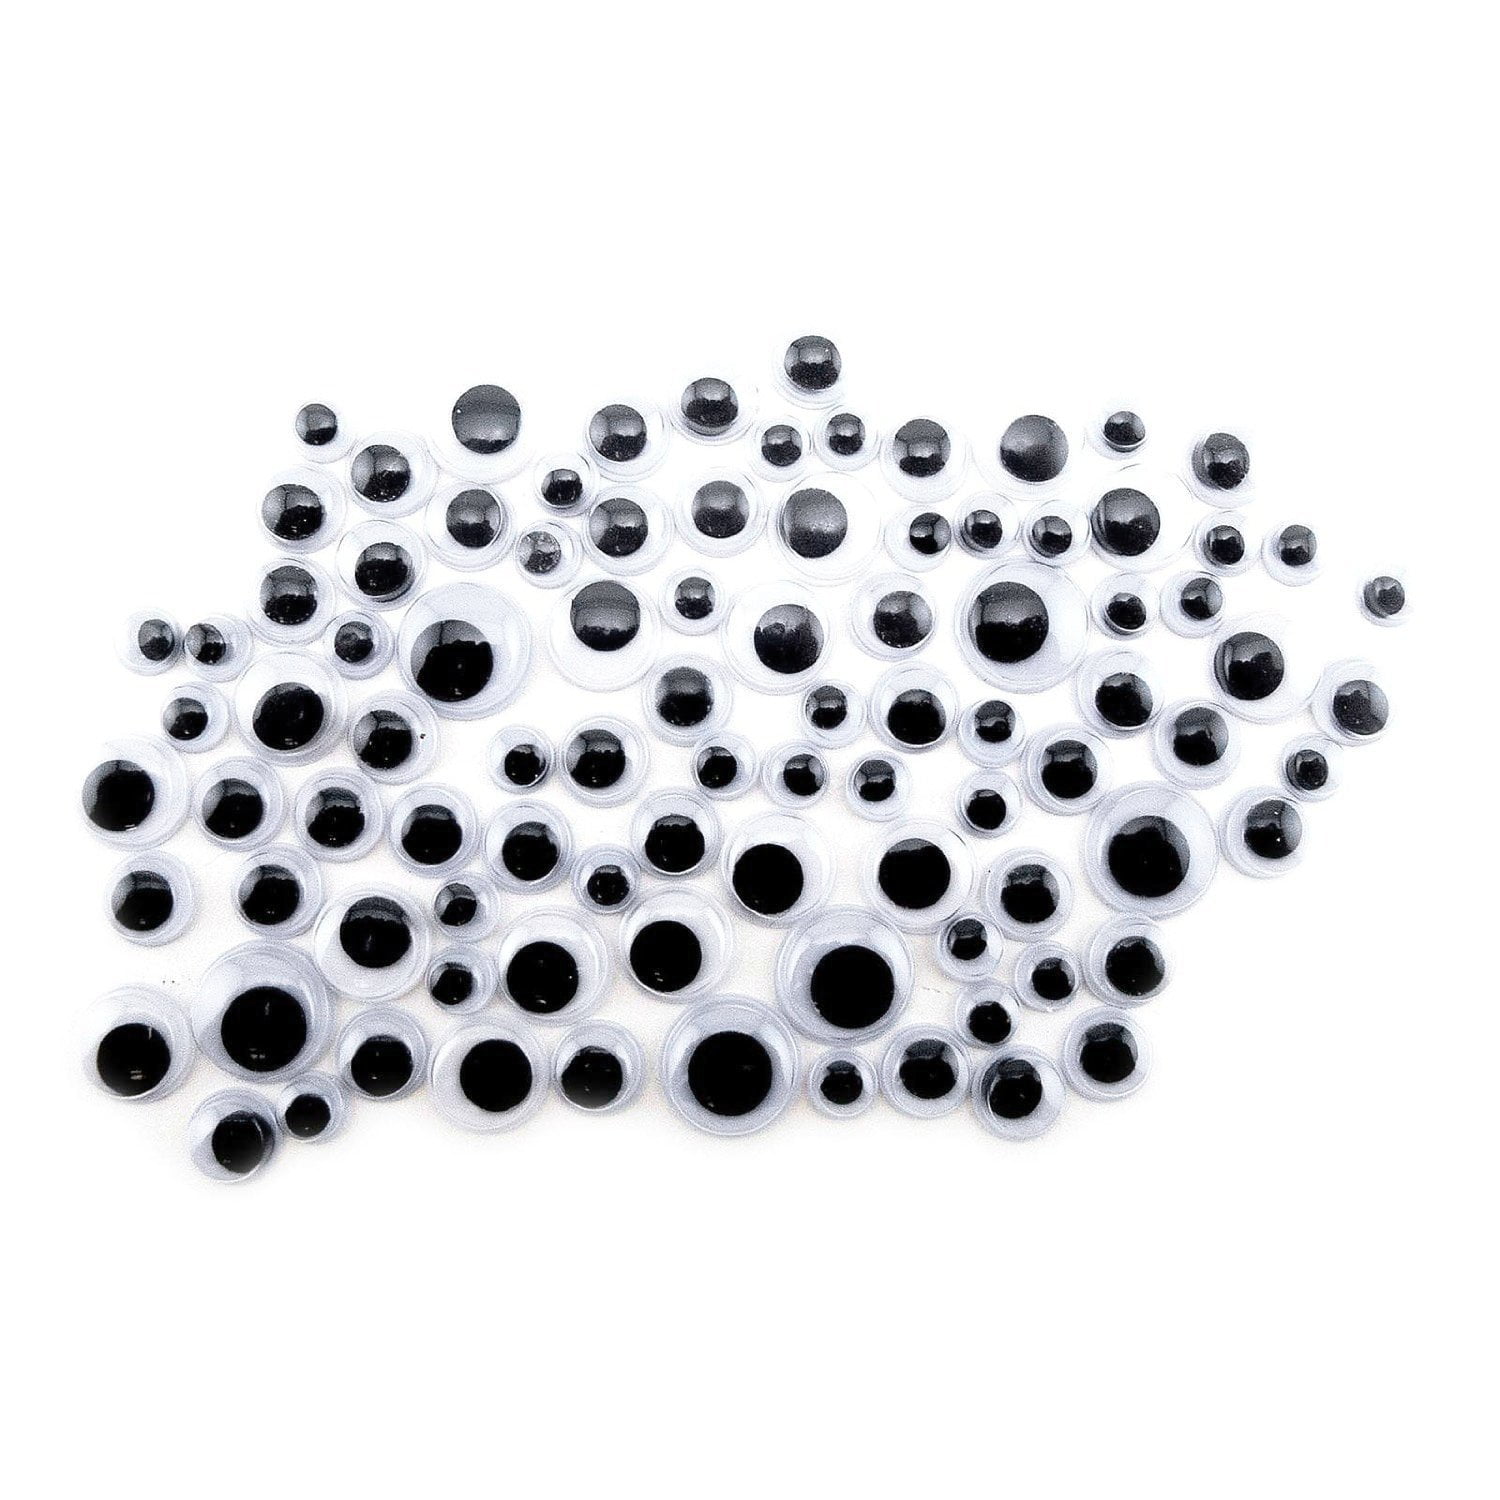 GOOGLY EYES Self Adhesive Wiggly Wobbly Eye Cardmaking Crafts School Projects 